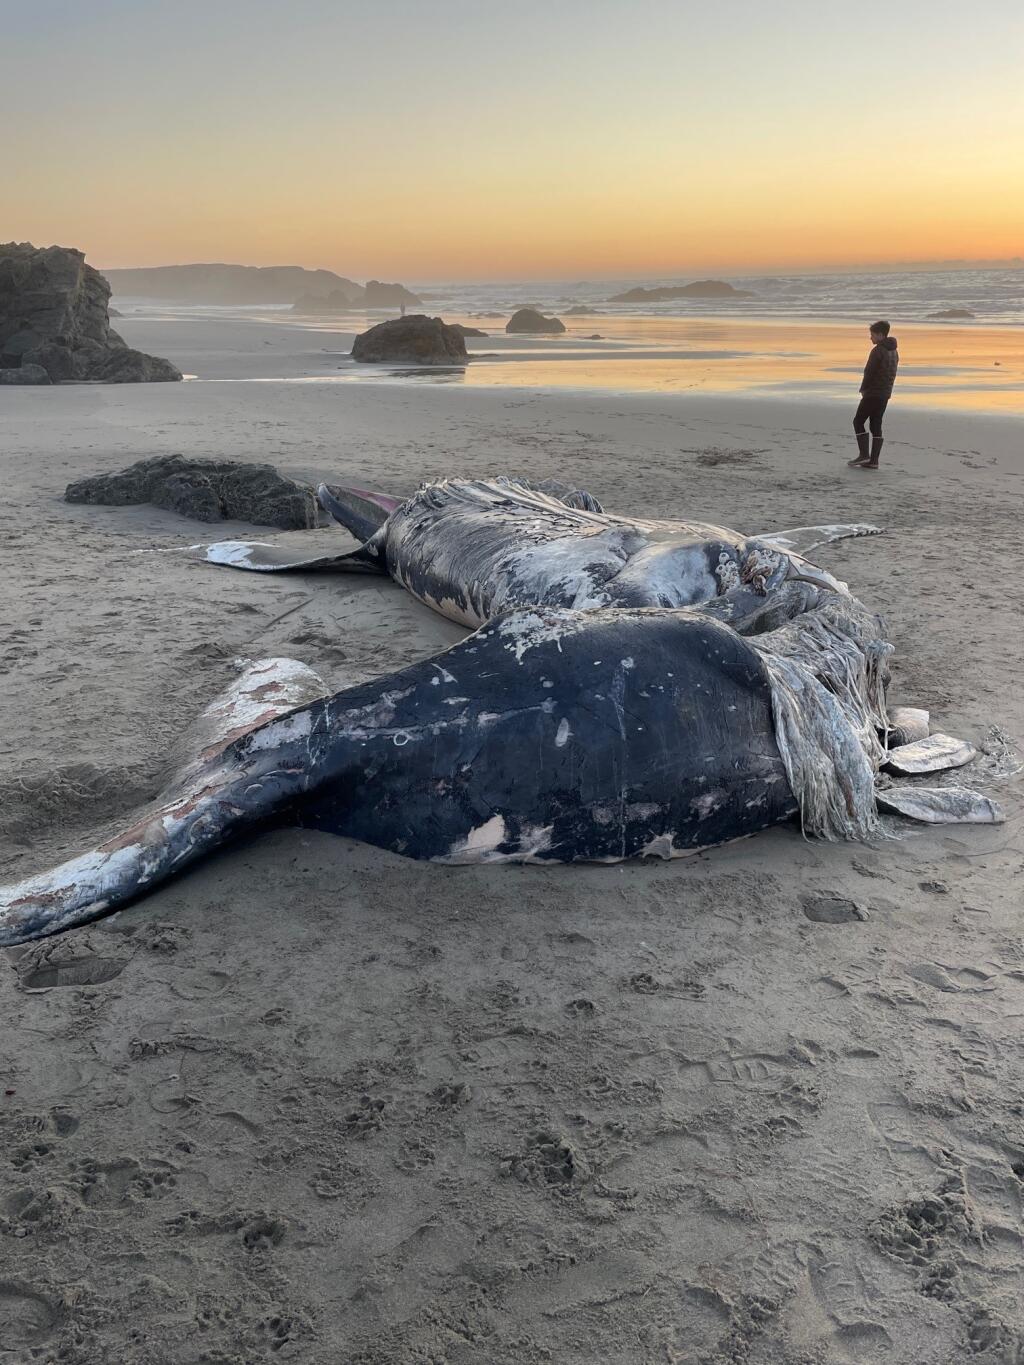 A juvenile male humpback whale, the second one in six weeks, washed ashore Saturday on the northern edge of Fort Bragg. Representatives from the Noyo Center for Marine Science, working as designees of the California Academy of Sciences and the National Oceanic and Atmospheric Administration's West Coast Stranding Network, conducted a necropsy of the decomposing animal but found no immediate evidence pointing to a cause of death. All activities covered by NOAA MMHSRP permit # 18786-06. (Noyo Center for Marine Science)